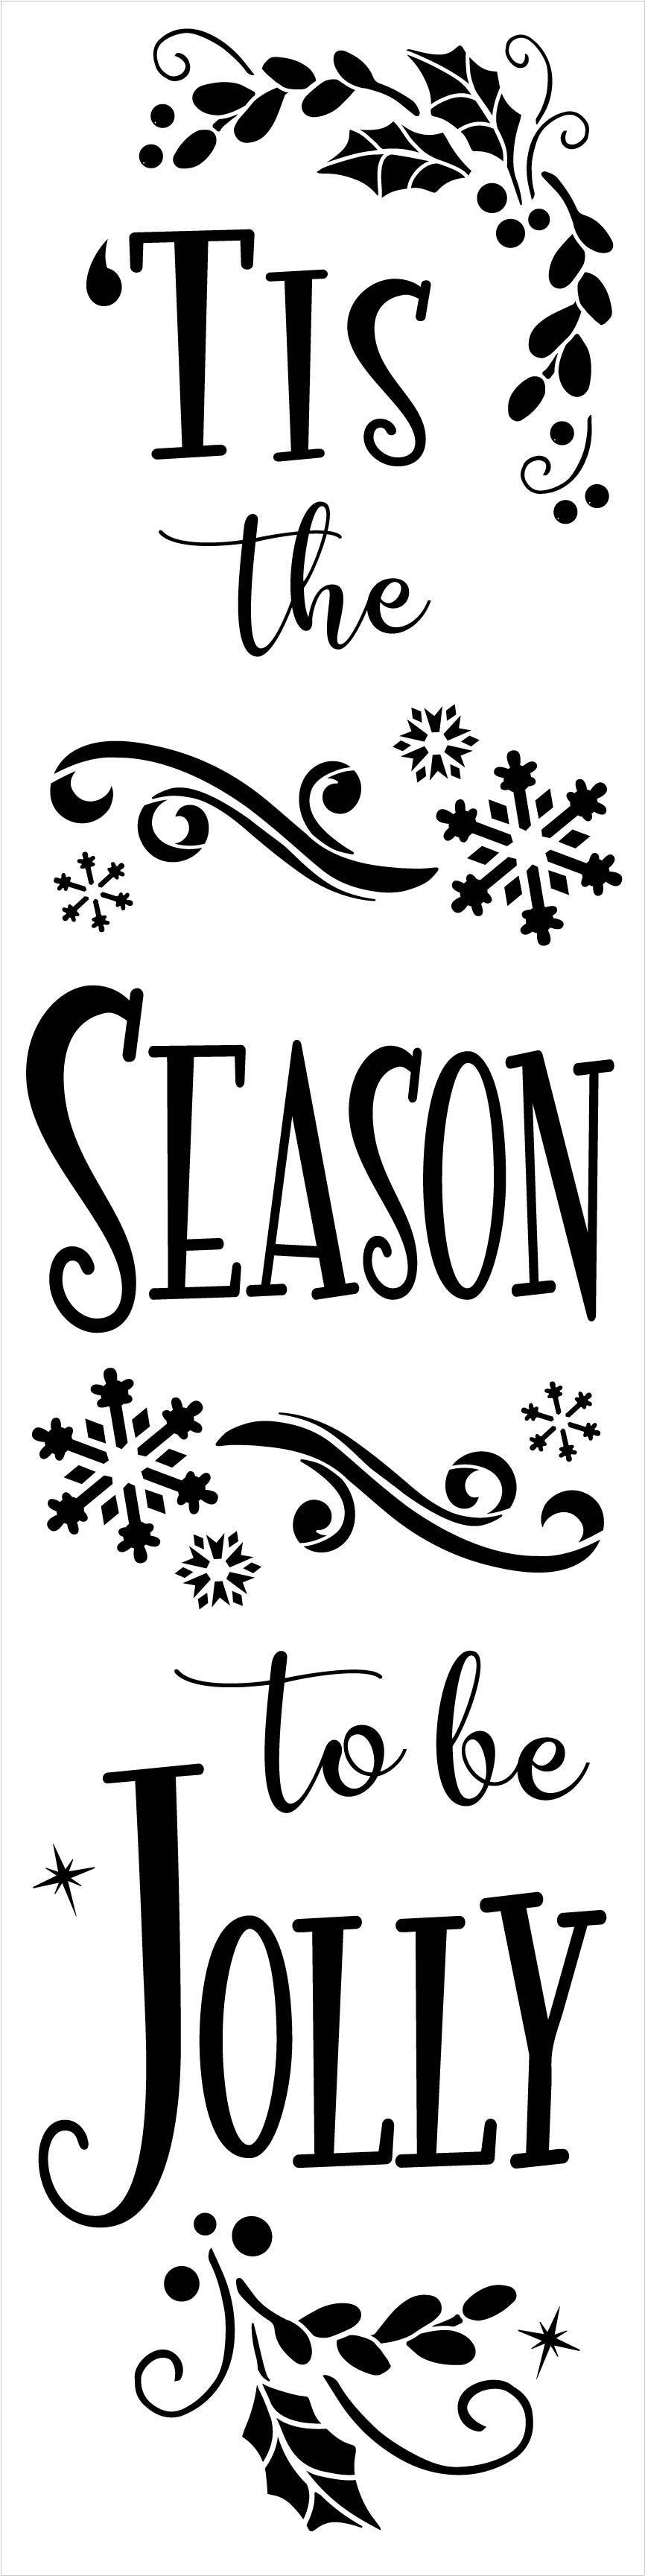 Tis The Season - Be Jolly 2-Part Stencil by StudioR12 | DIY Christmas Home Decor Gift | Craft & Paint Wood Sign | Reusable Mylar Template | 1 x 4 FEET